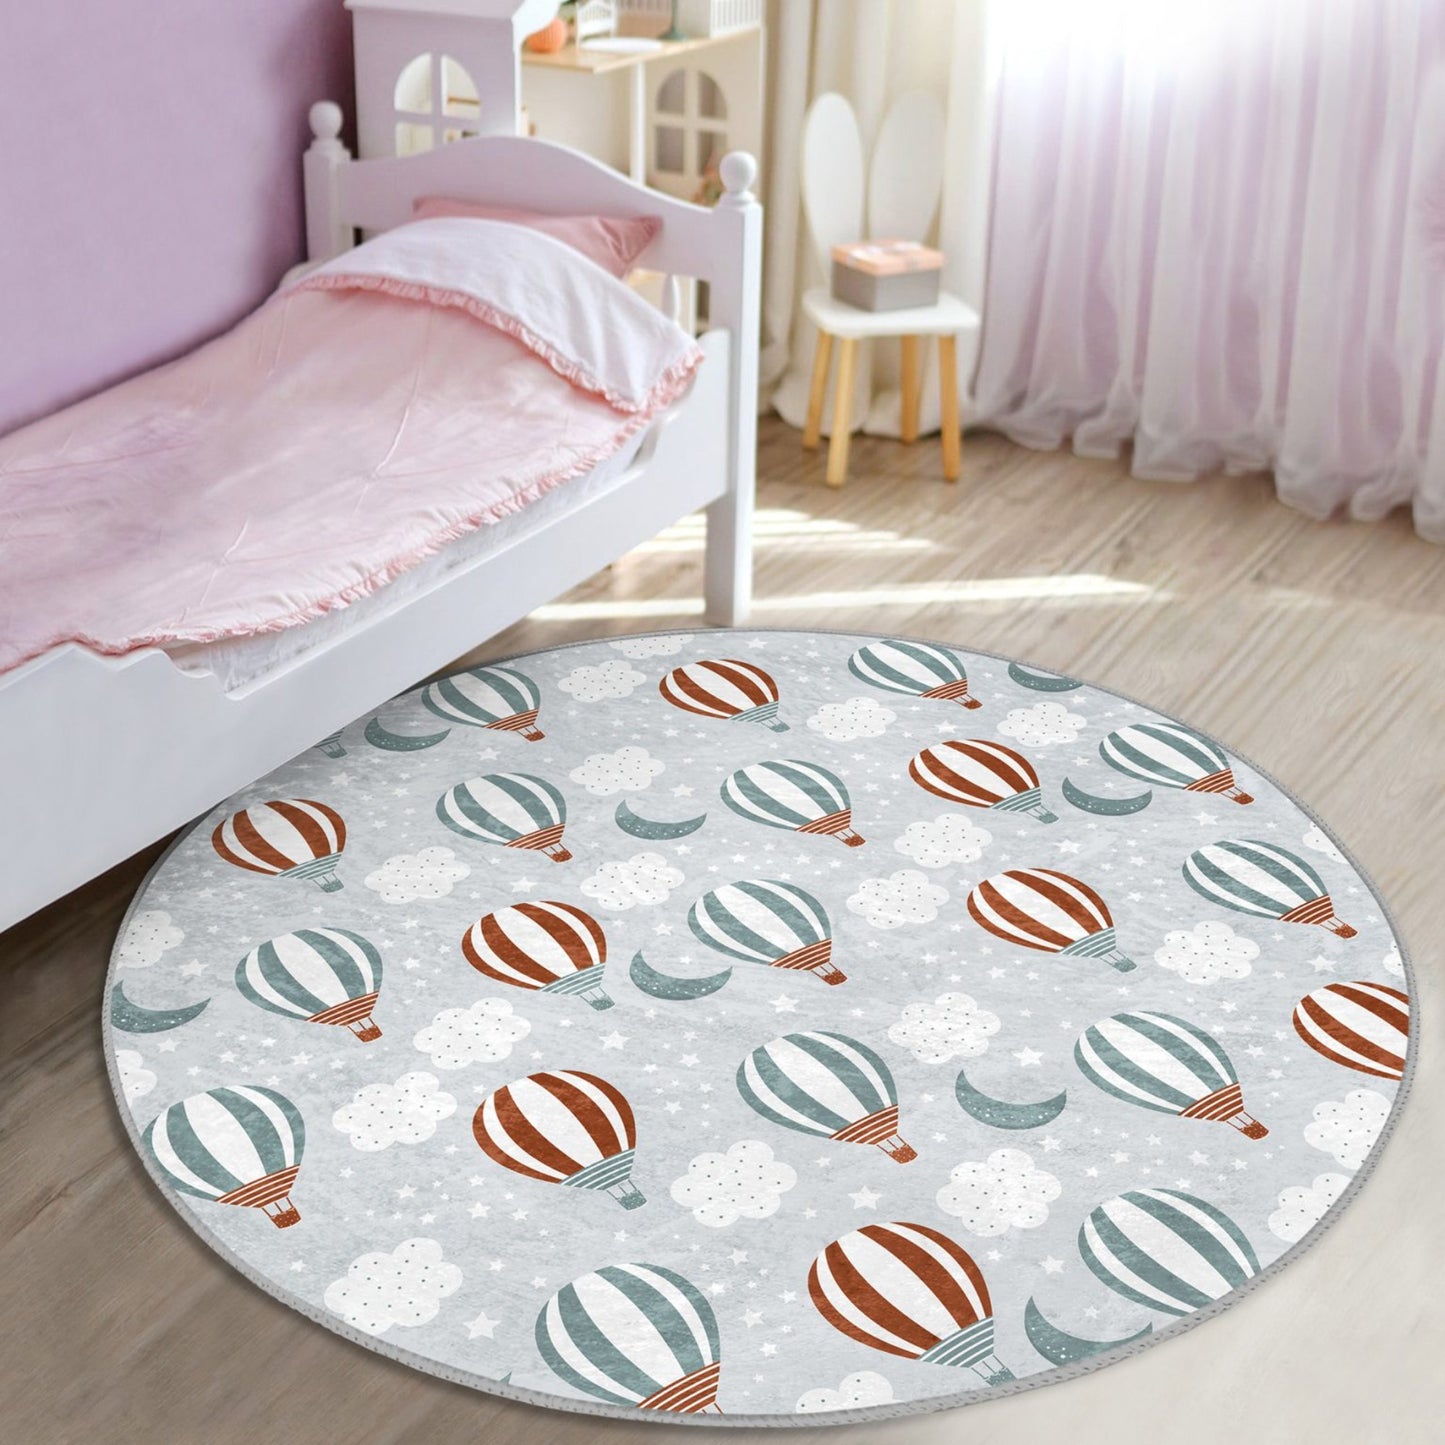 Durable Rug with Flying Balloons Design